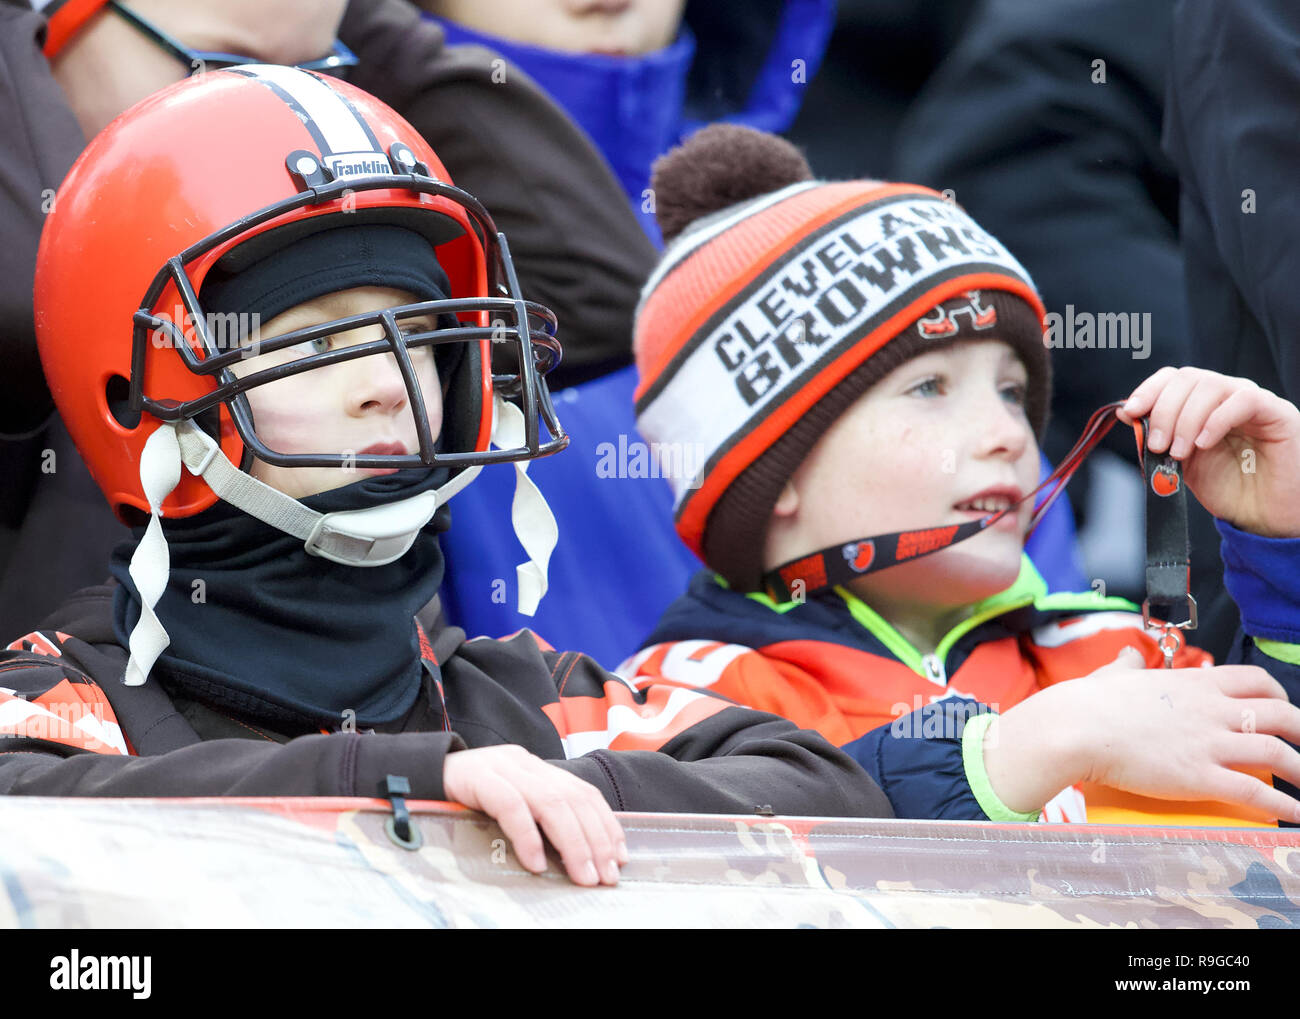 Cleveland, Ohio, USA. 23rd Dec, 2018. Young Cleveland Browns fans at the NFL football game between the Cincinnati Bengals and the Cleveland Browns at First Energy Stadium in Cleveland, Ohio. JP Waldron/Cal Sport Media/Alamy Live News Stock Photo